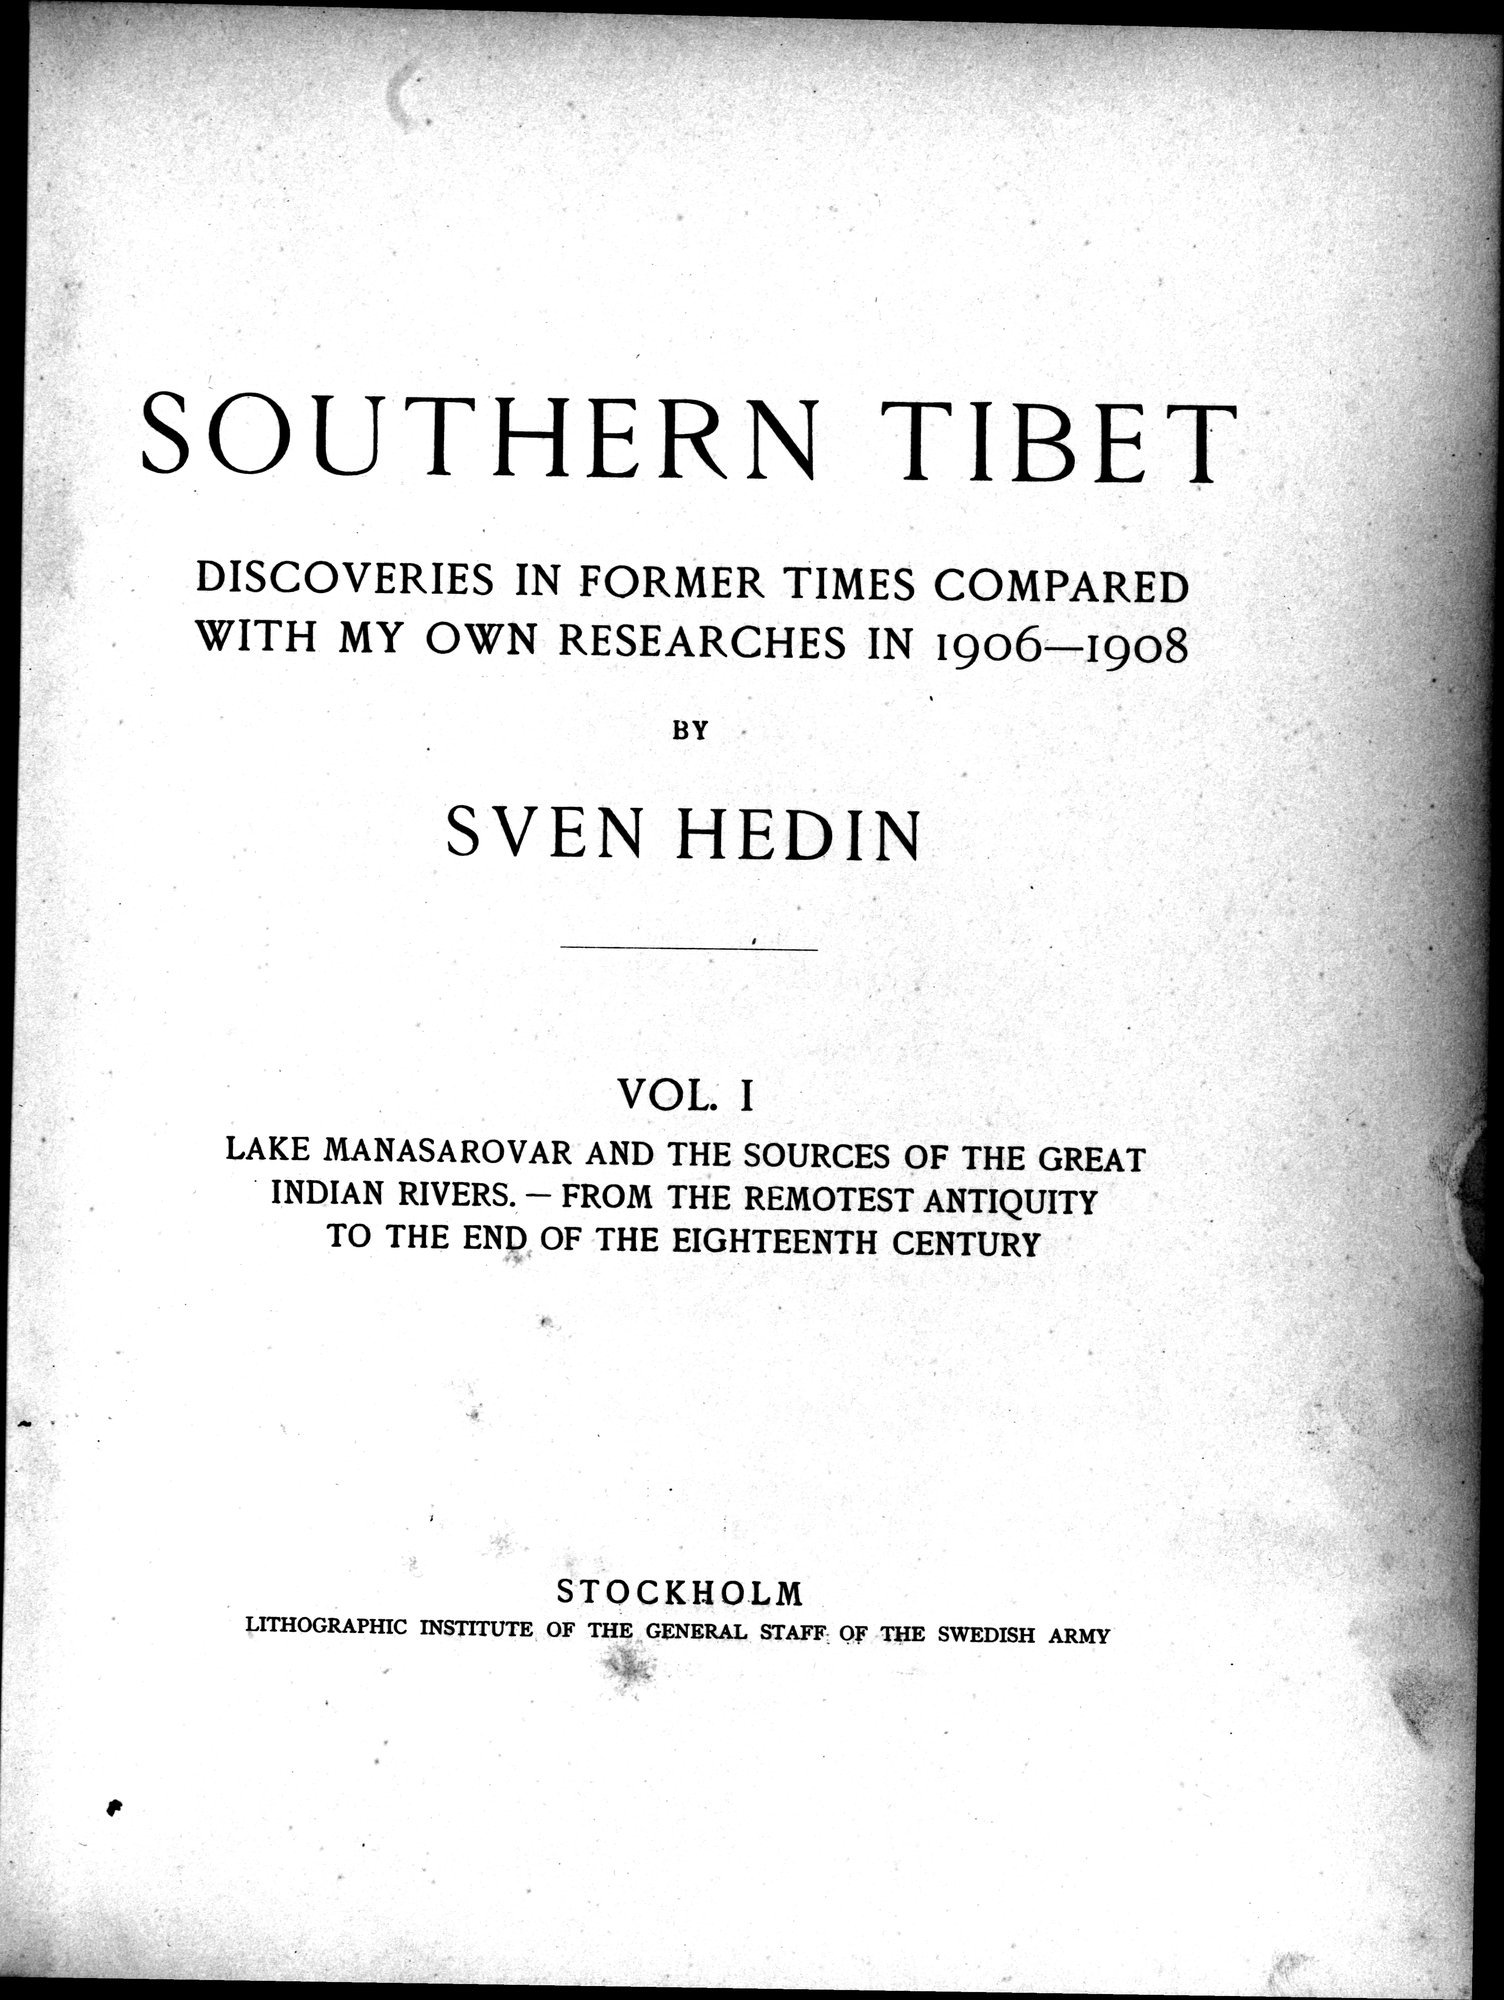 Southern Tibet : vol.1 / Page 11 (Grayscale High Resolution Image)